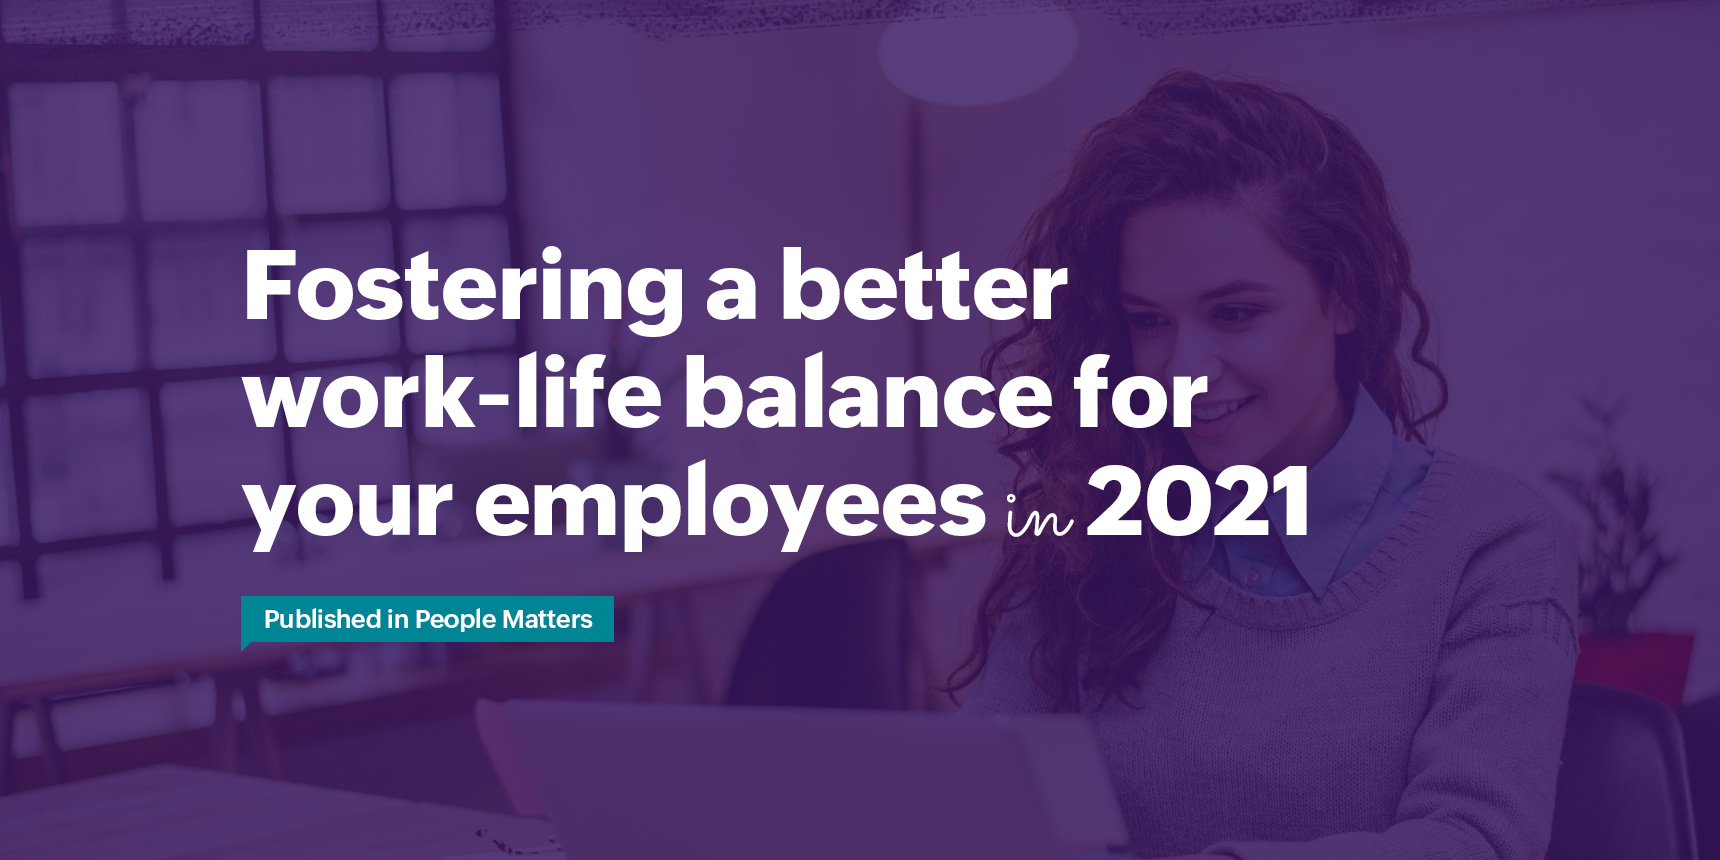 Developing a better work-life balance for your employees